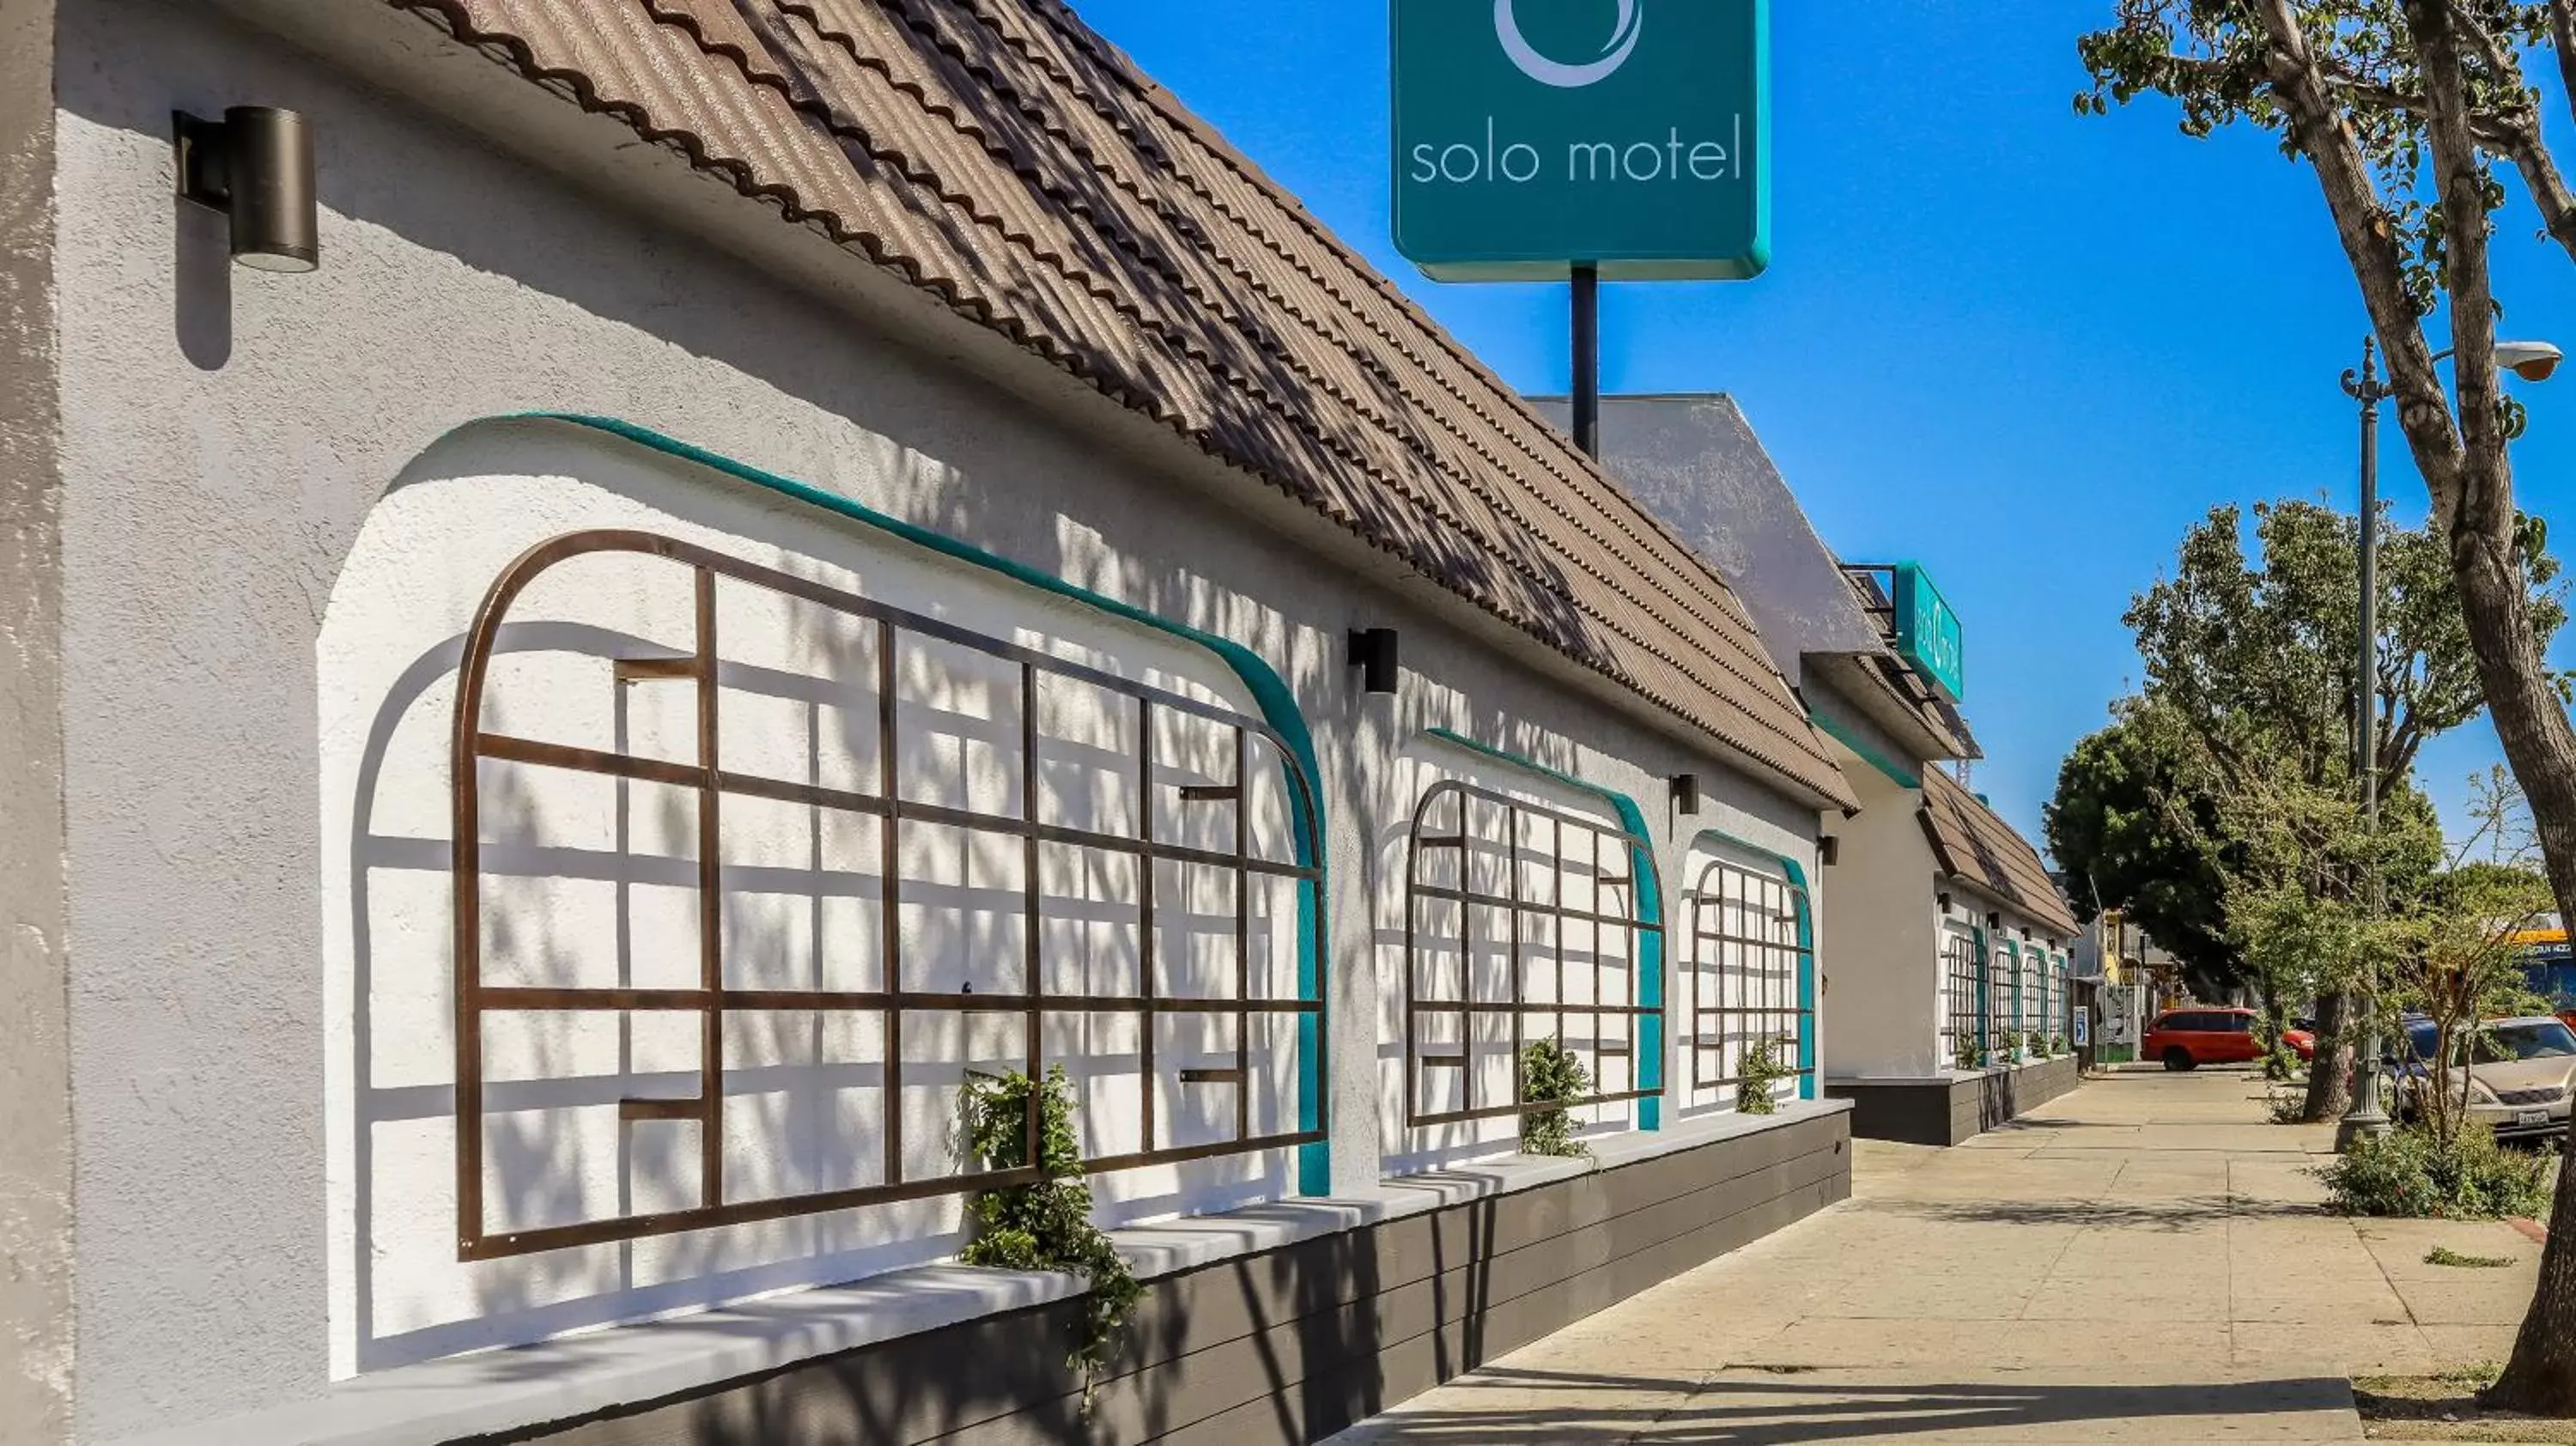 Property Building in Solo Motel Broadway